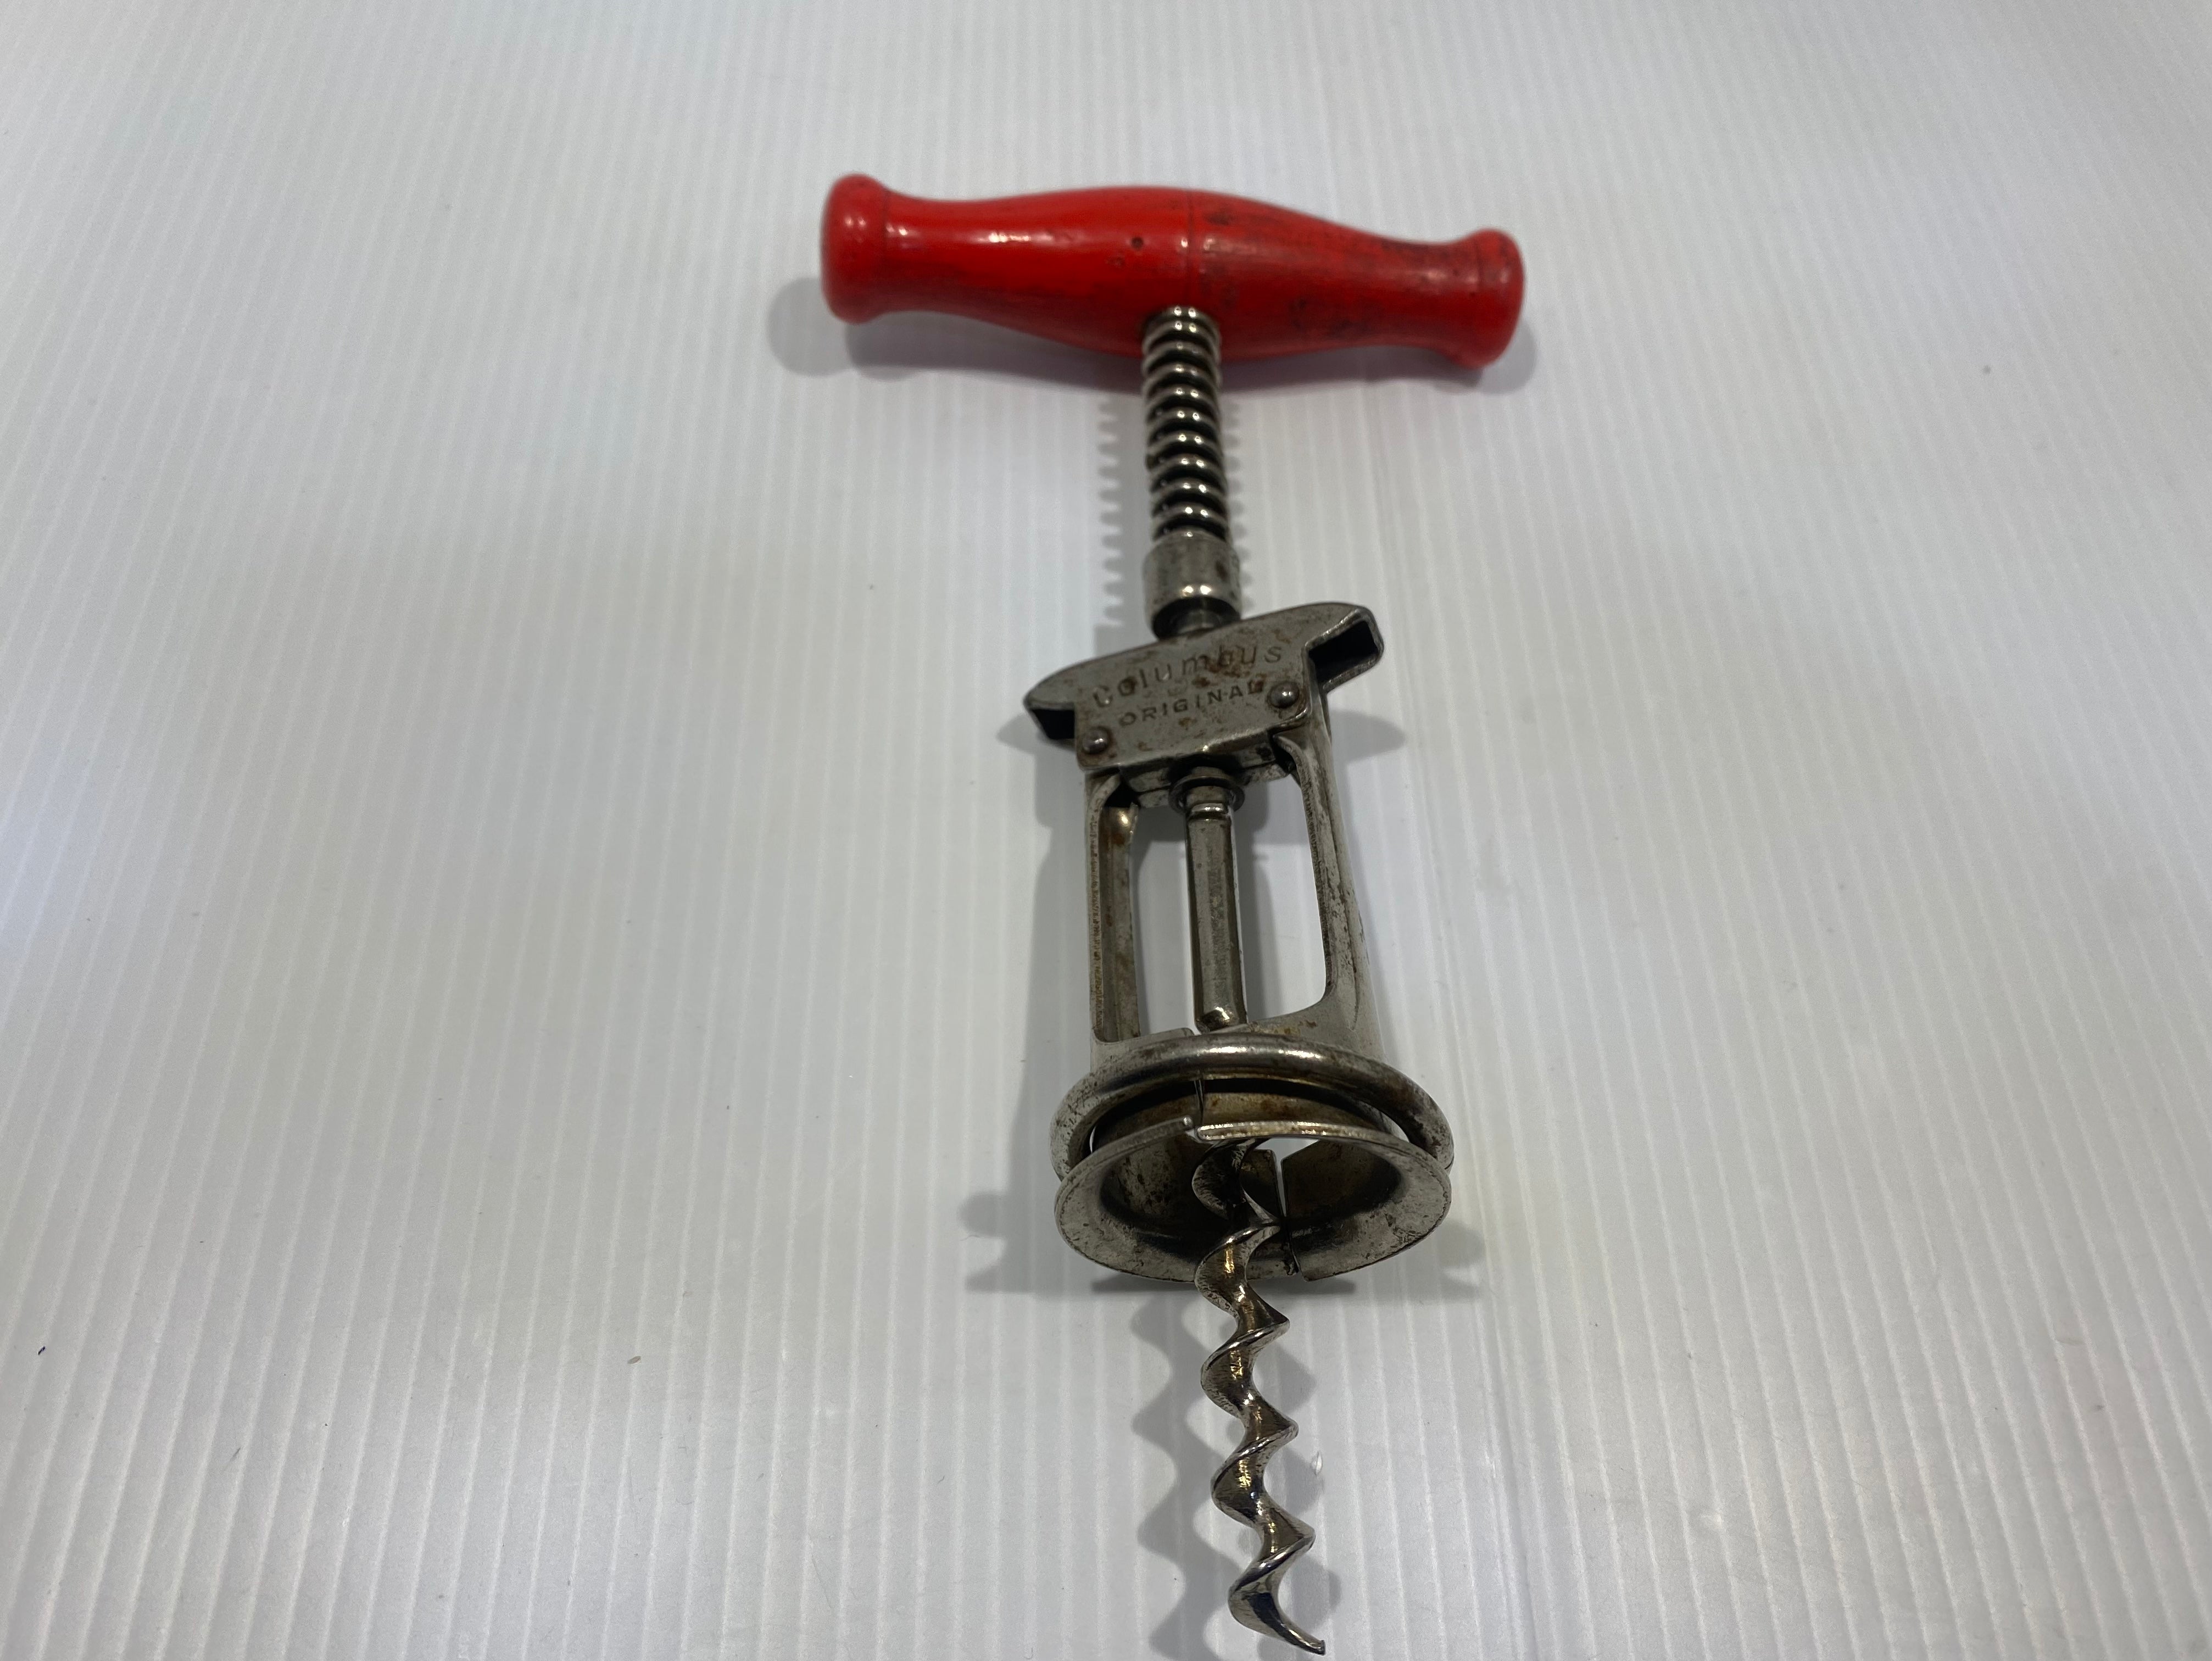 Columbus corkscrew manufactured in Germany